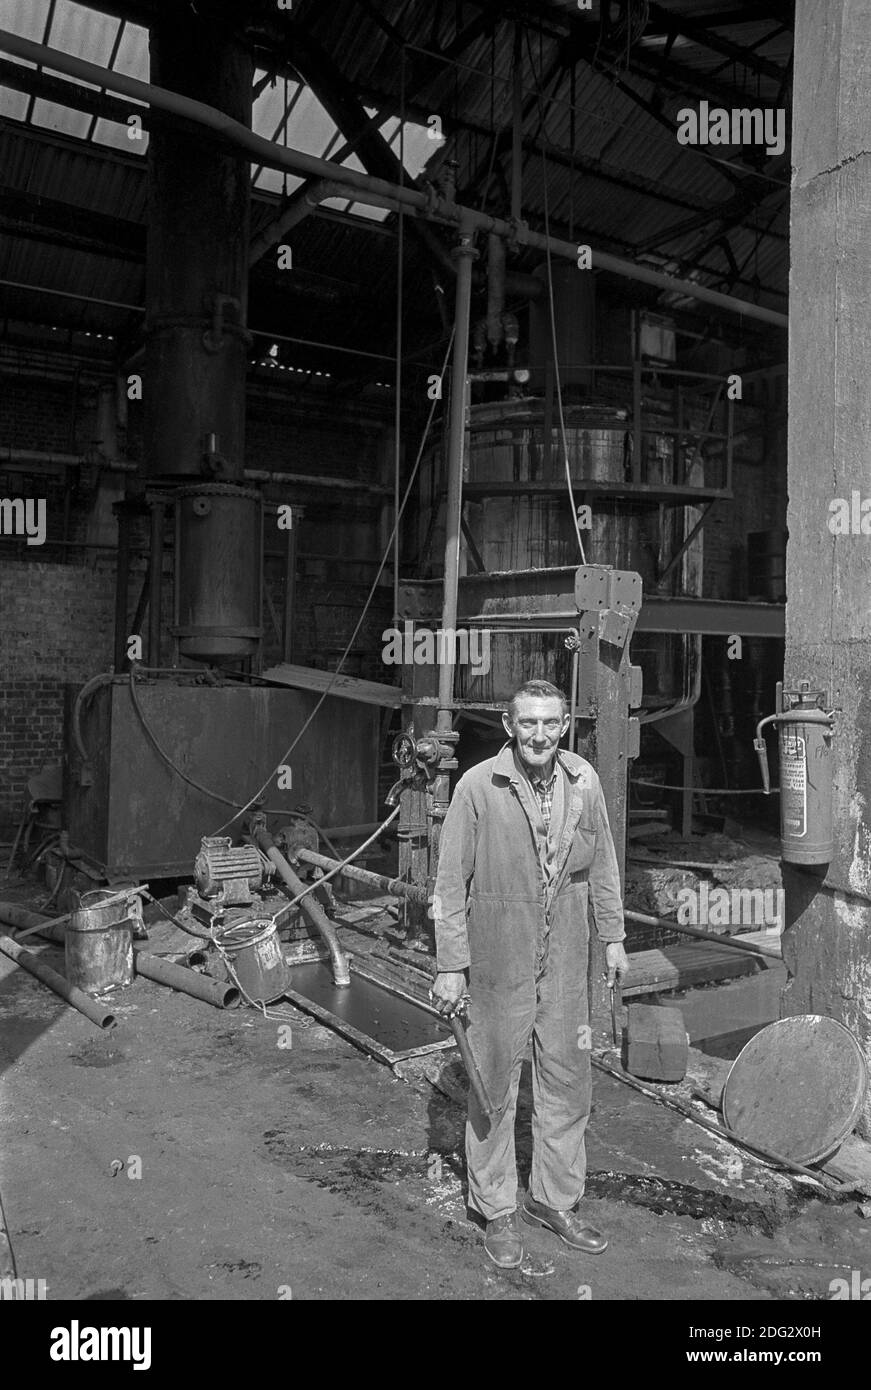 UK, London, Docklands, Isle of Dogs. early 1974. Near to Coldharbour. A maintenance fitter in the factory. Foundry & Metallurgical co.(Owned by P & I Danshuski - Russian owners, (information refers to the 1950s). Stock Photo